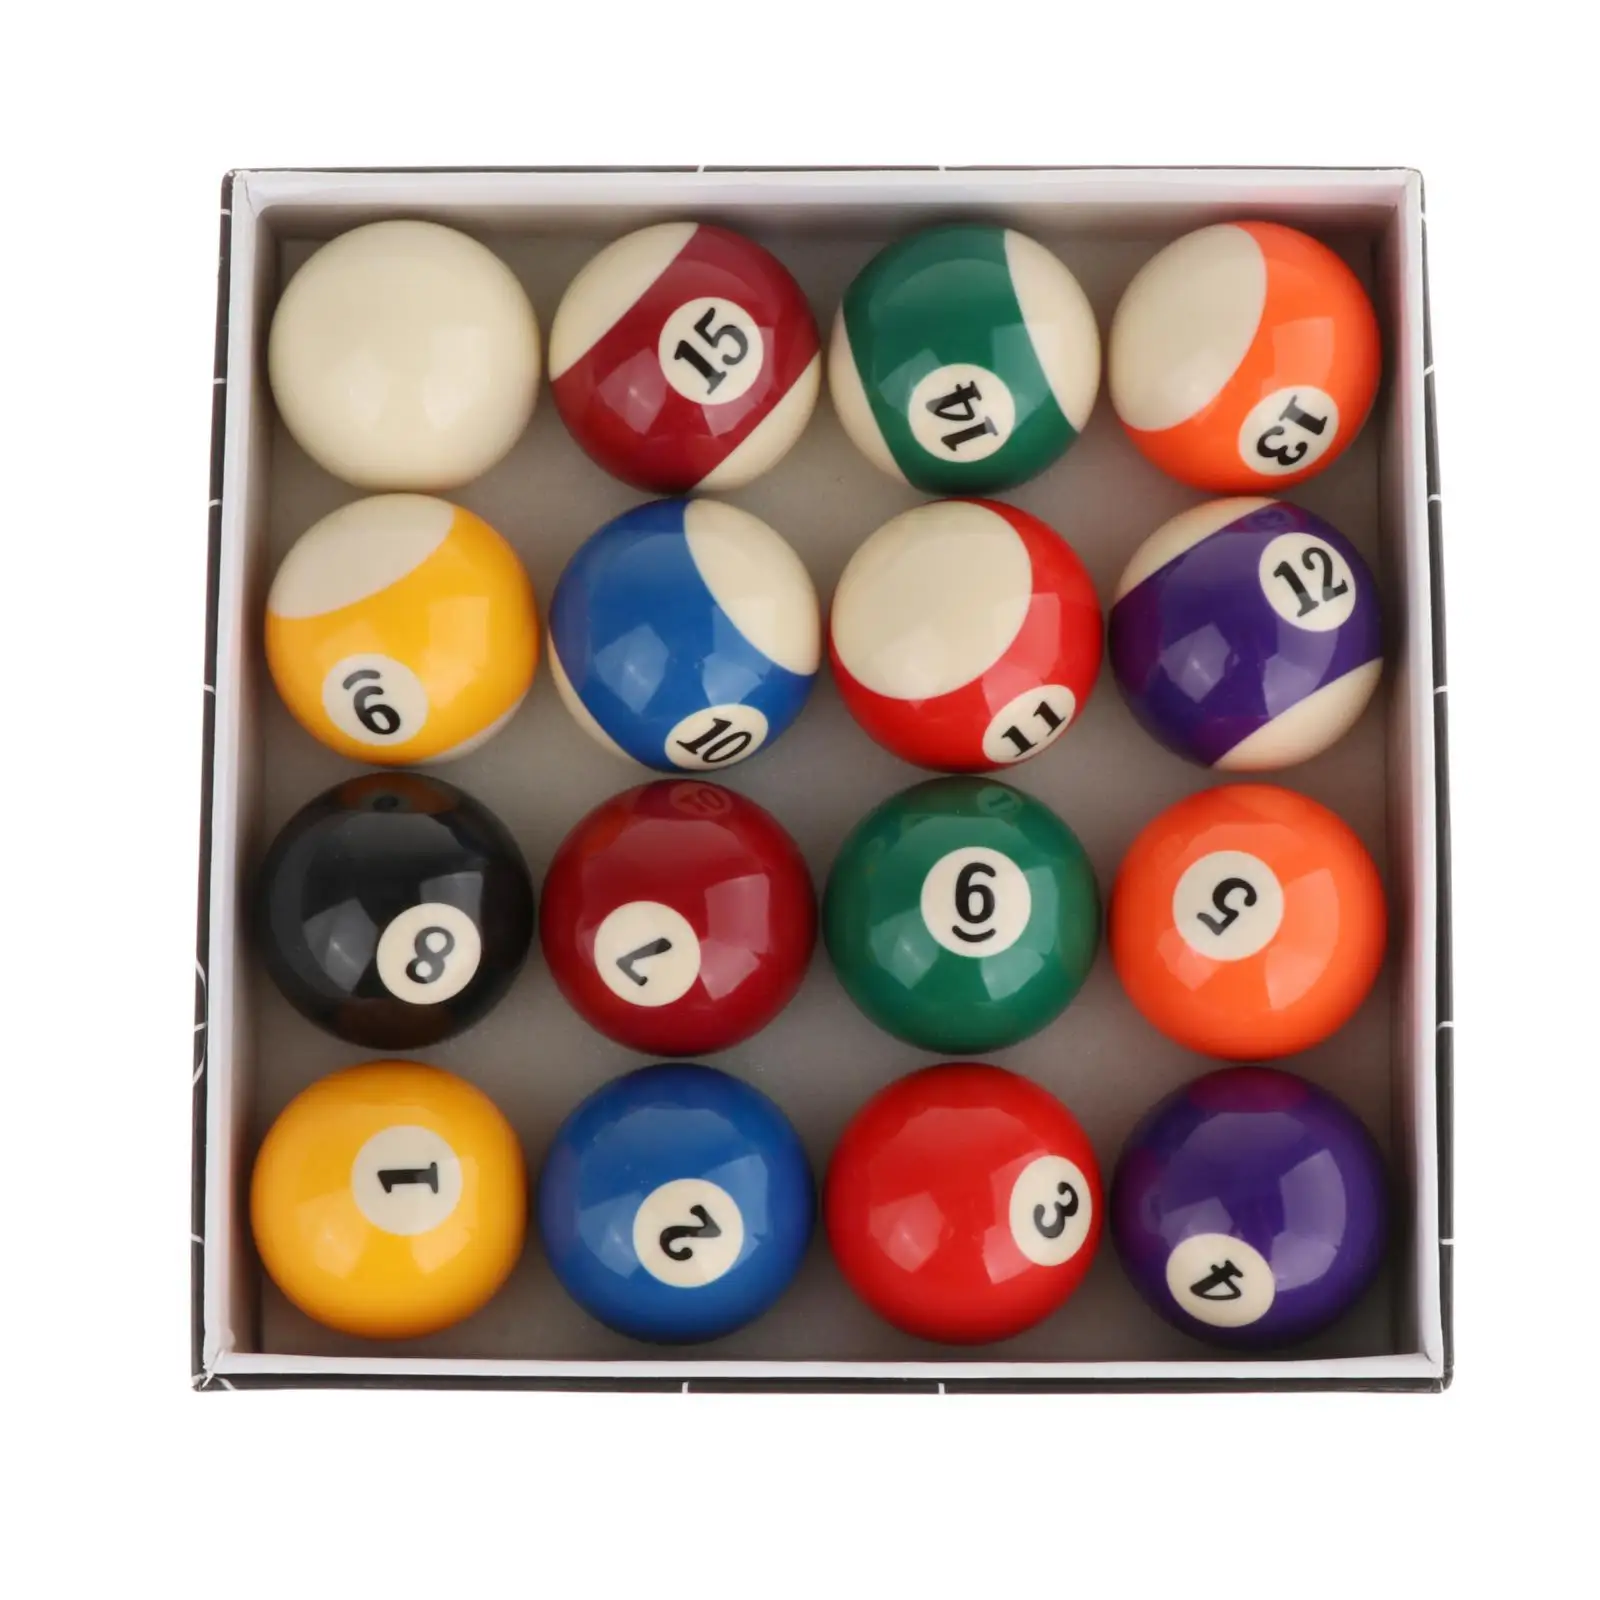 16Pcs Billiard Balls Billiards Pool Ball Set for Party Supplies Hotels Clubs 15 Numbered Balls 1 White Ball Full Set Durable